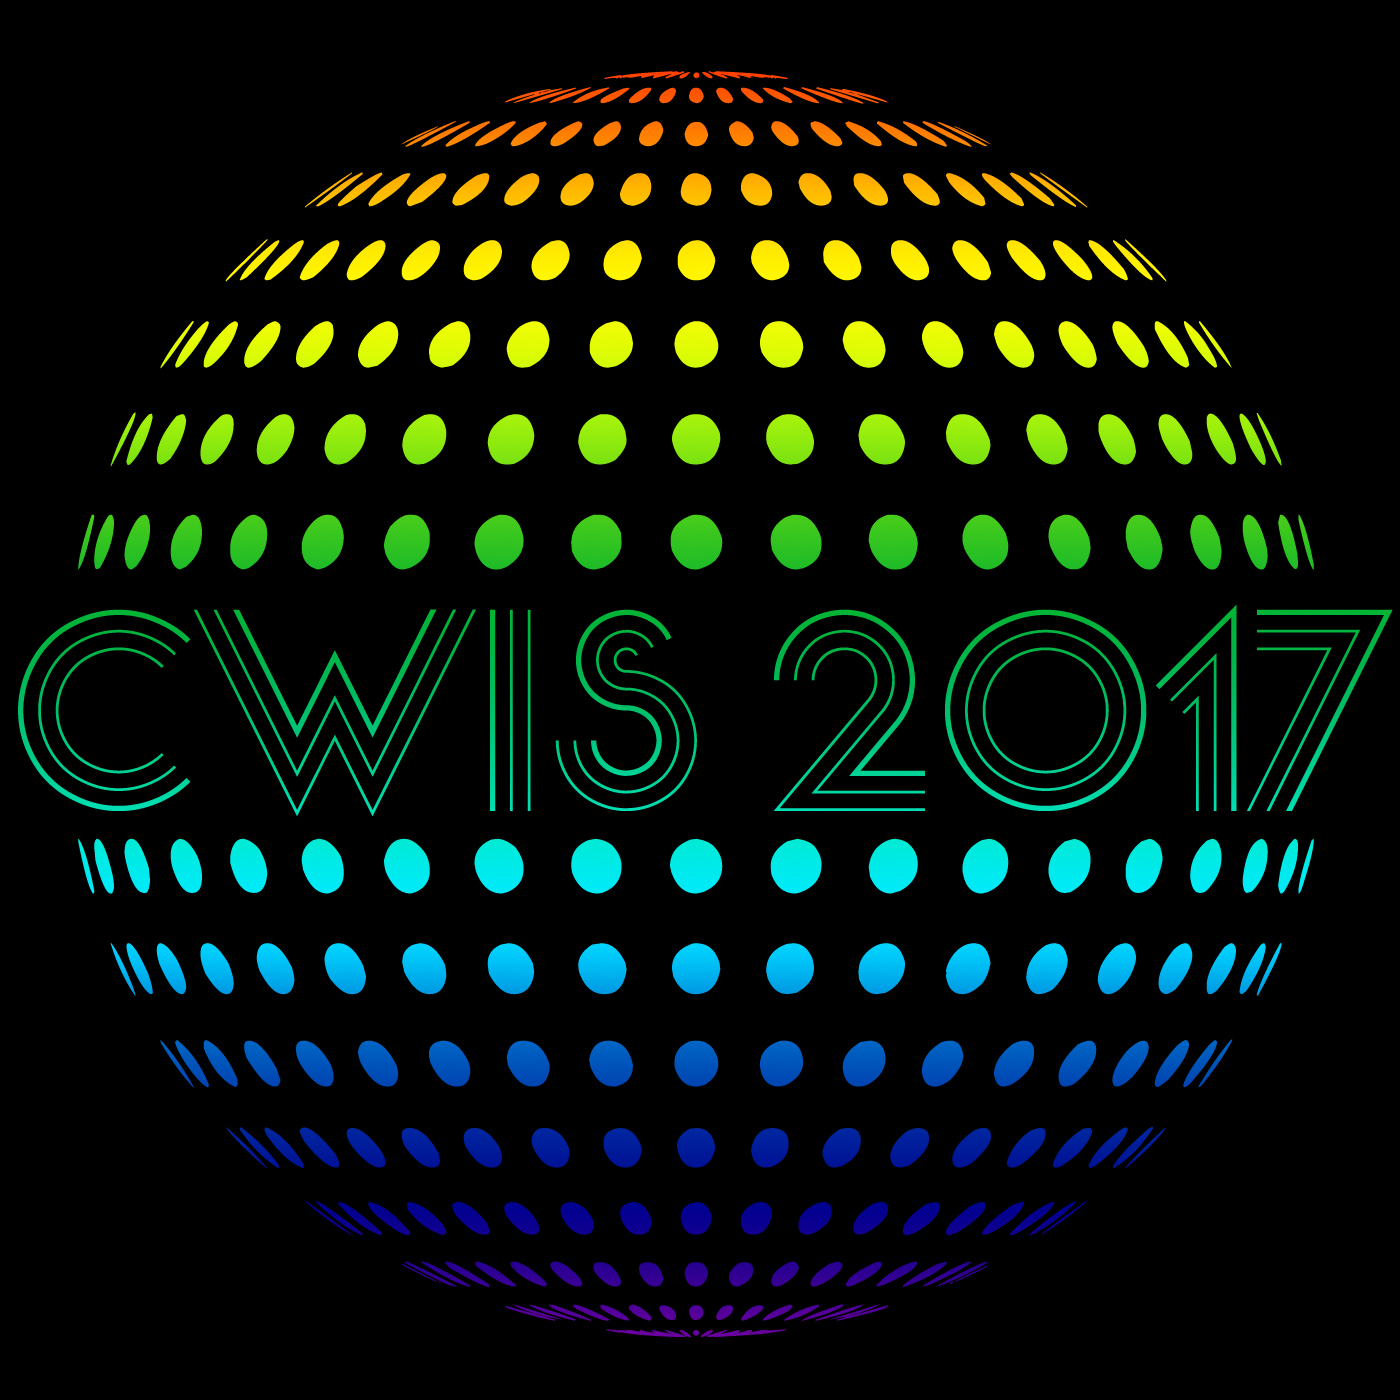 Cwis Podpeth 2017